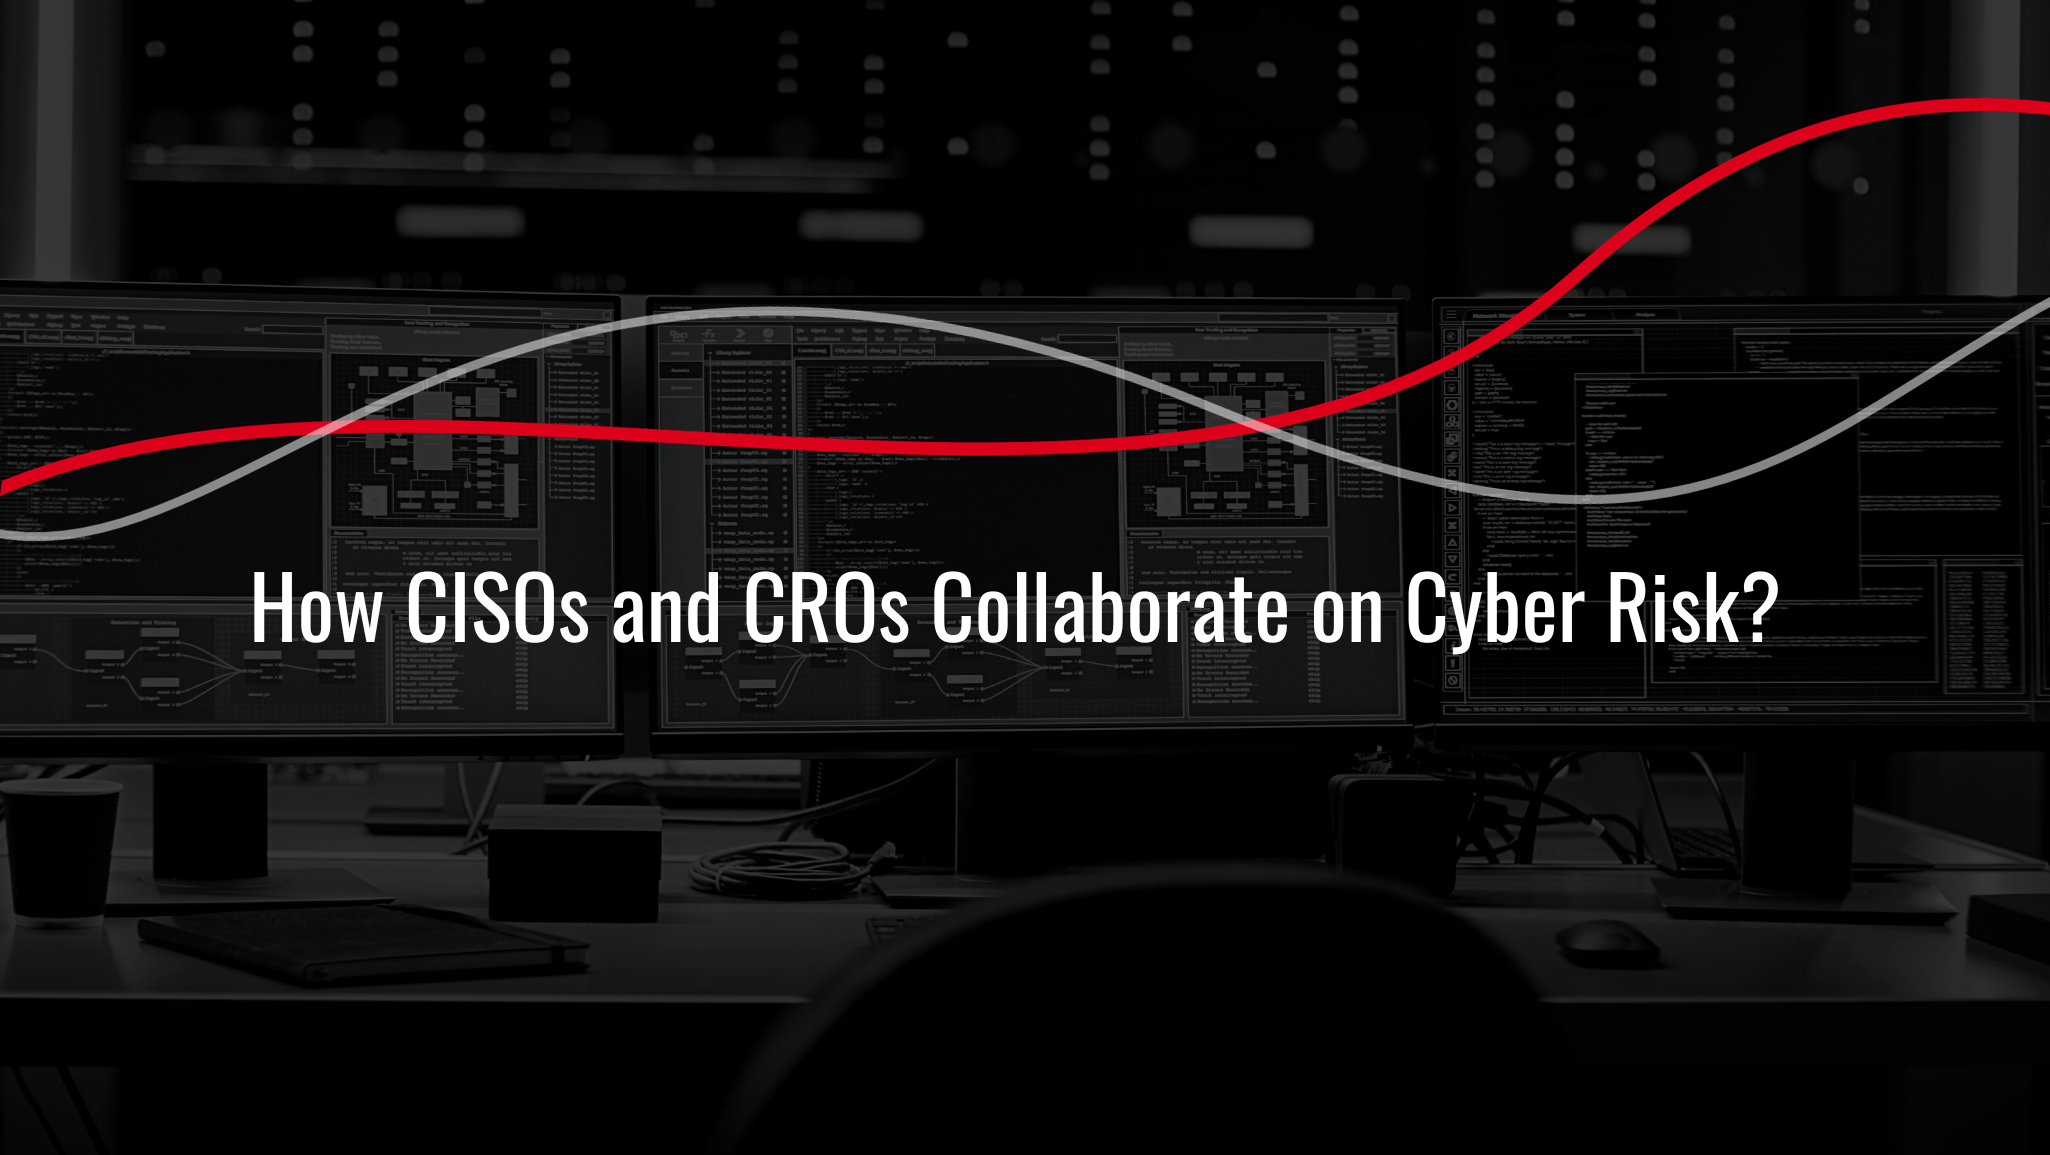 HHow CISOs and CROs Collaborate on Cyber Risk